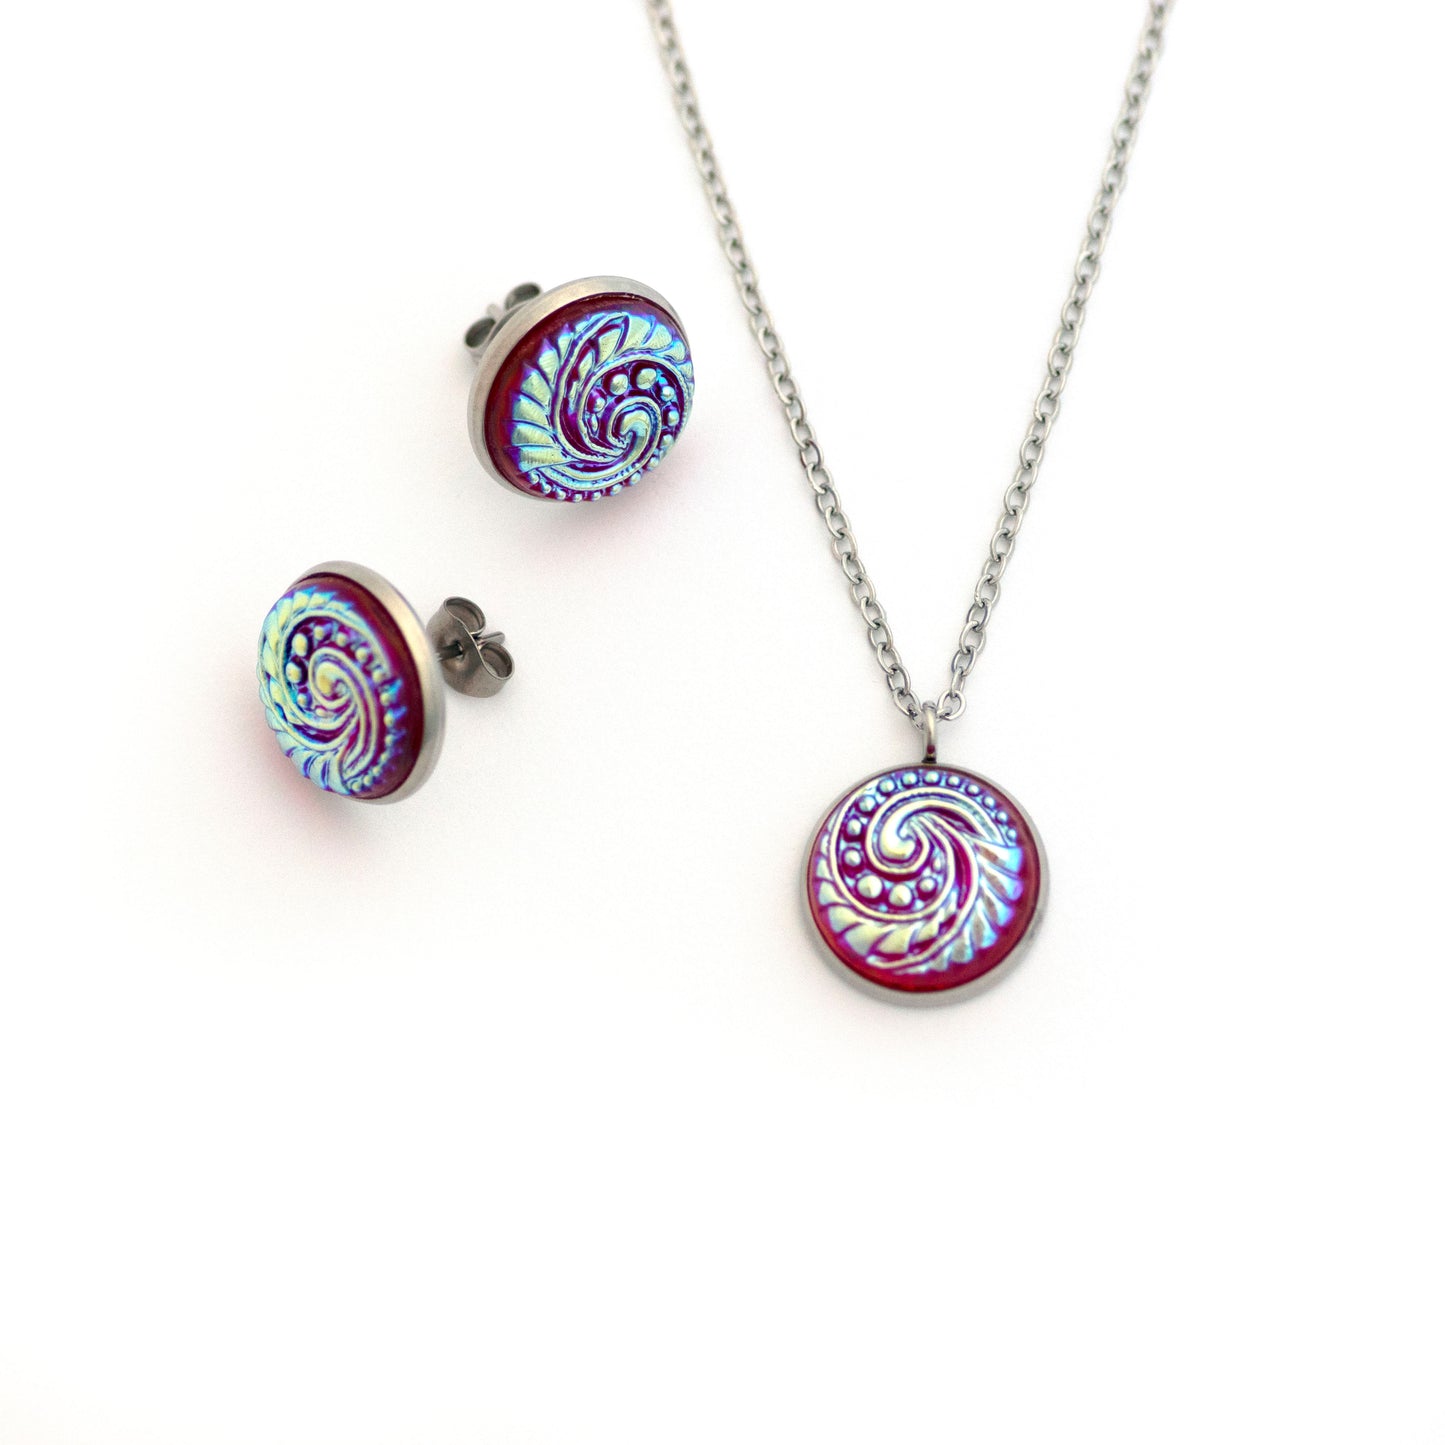 Red Glass with Iridescent Ocean Swirl Czech Glass Button Necklace and Earrings Gift Set